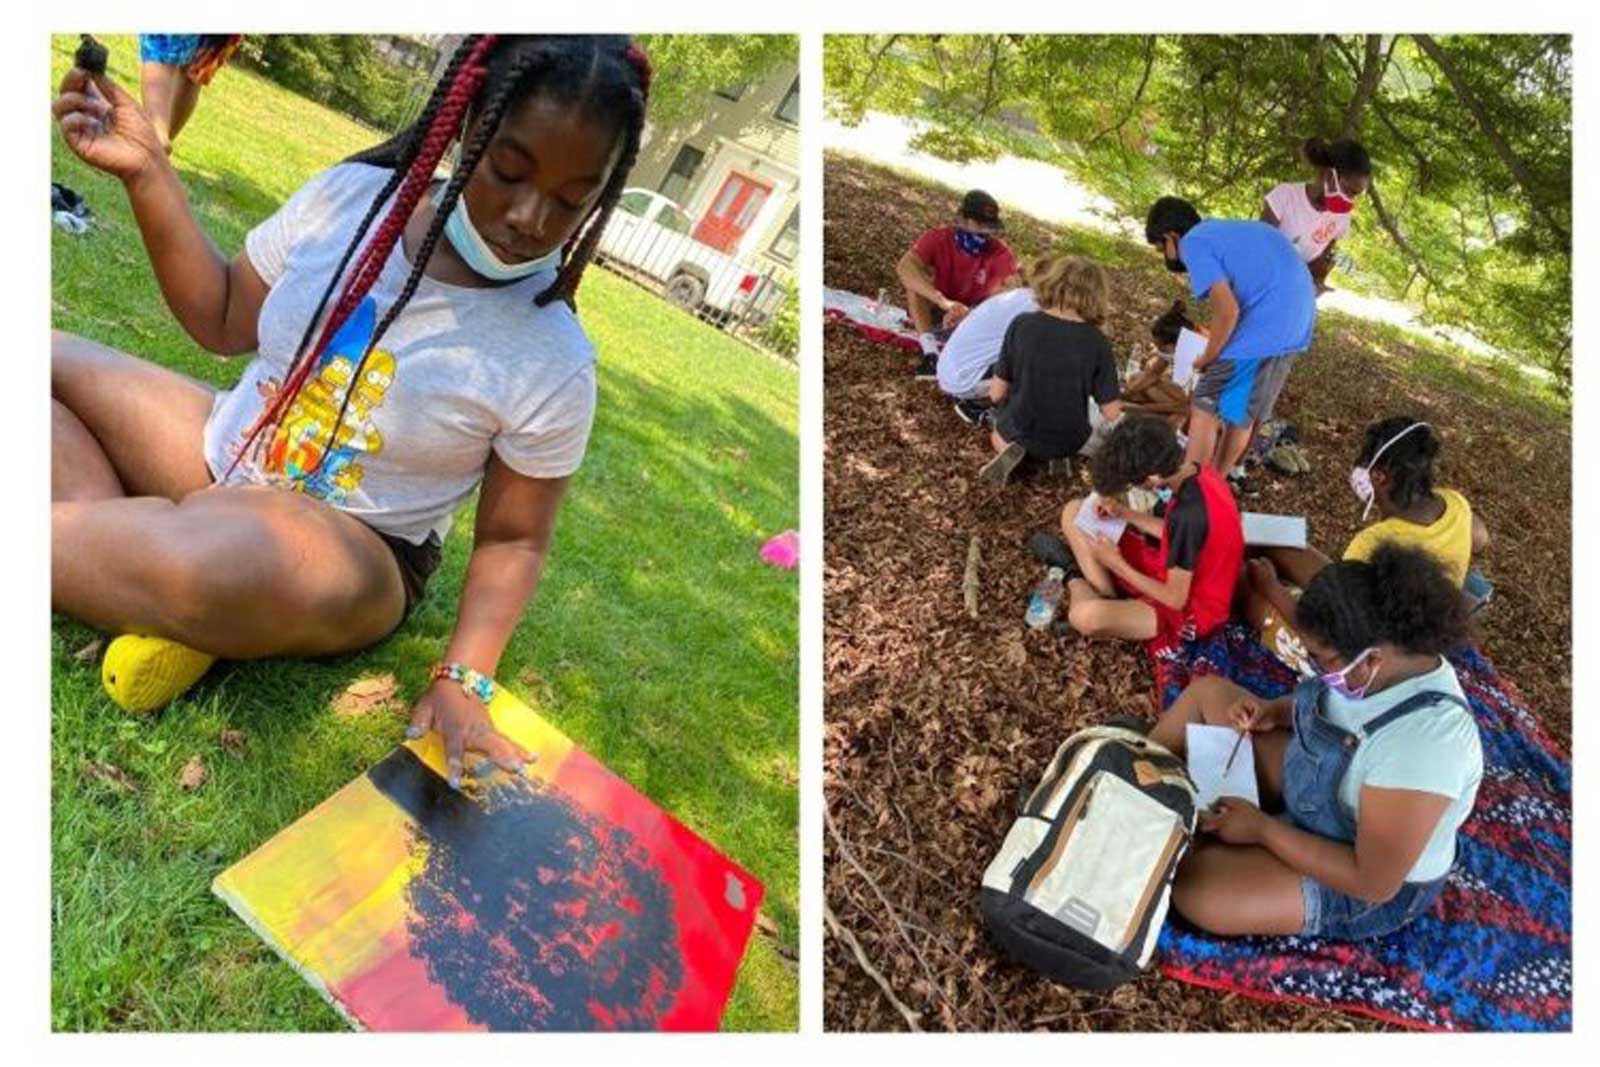 Youth paint what they imagine “Election Day,” an annual gathering of early Black Newporters, might have once looked like at the site where the event used to take place.